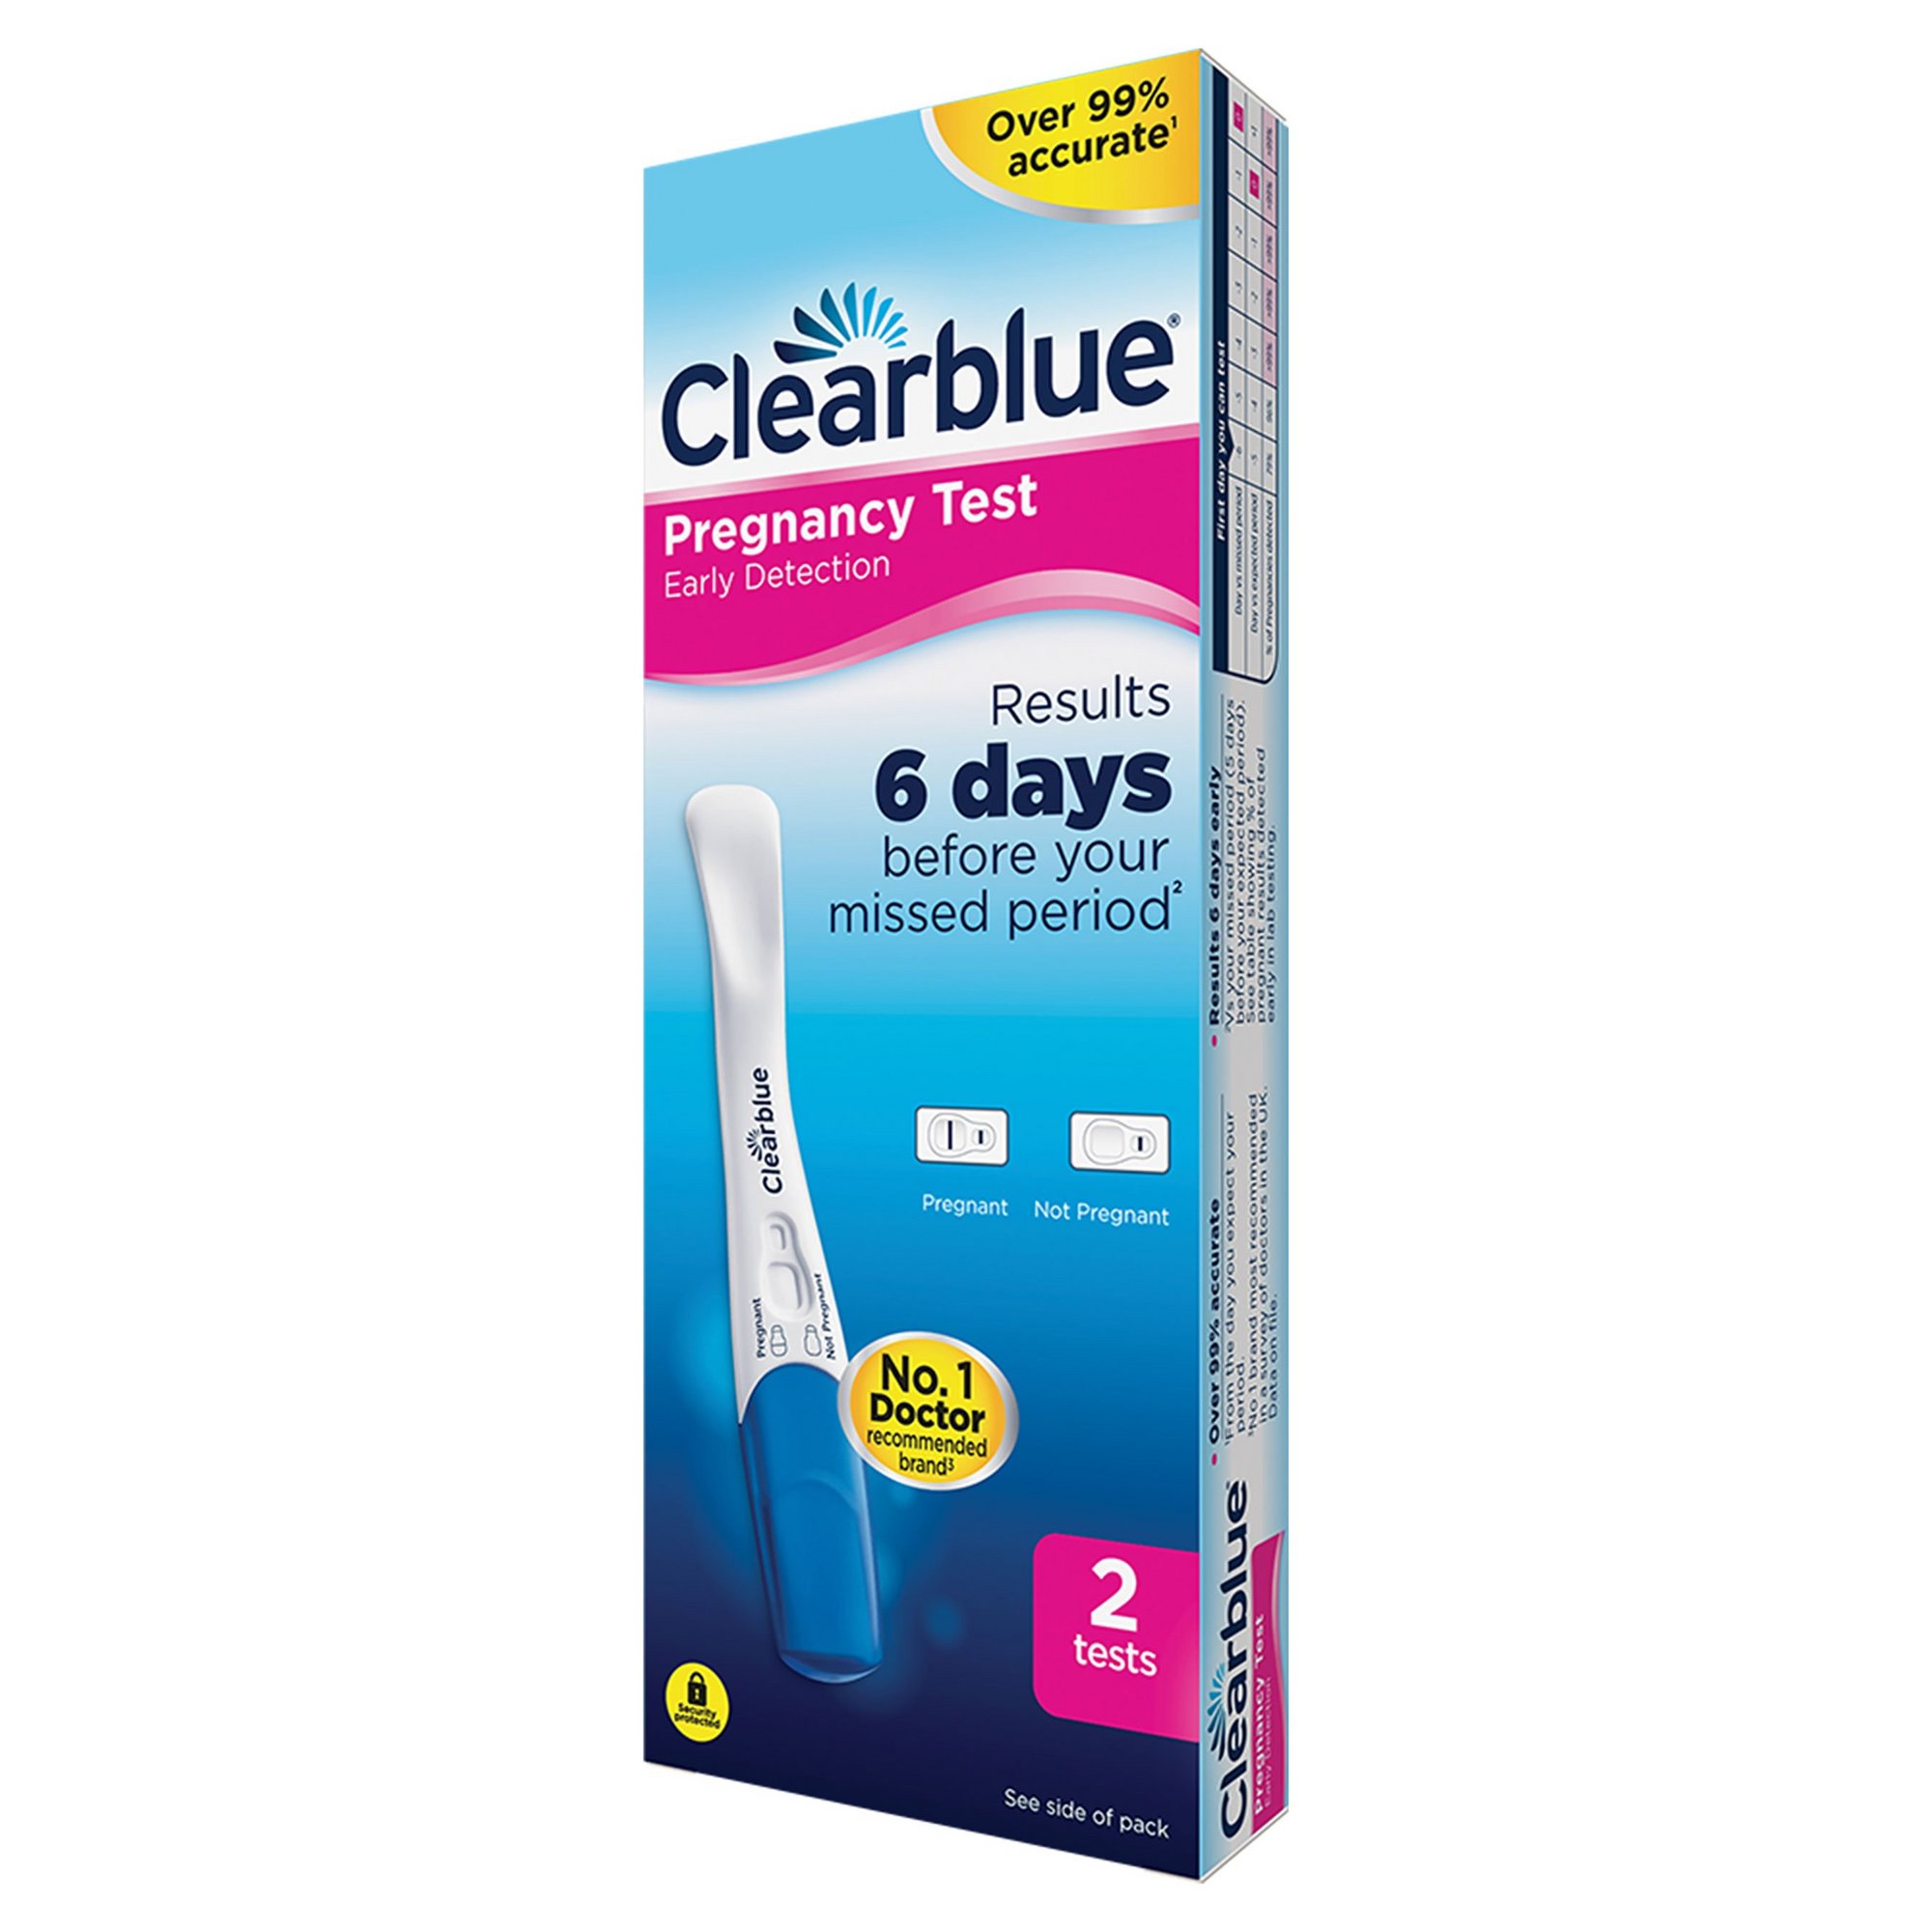 Тесты clearblue форум. Clearblue. Clearblue early. Тест на беременность Clearblue. Цифровой тест на беременность Clearblue.